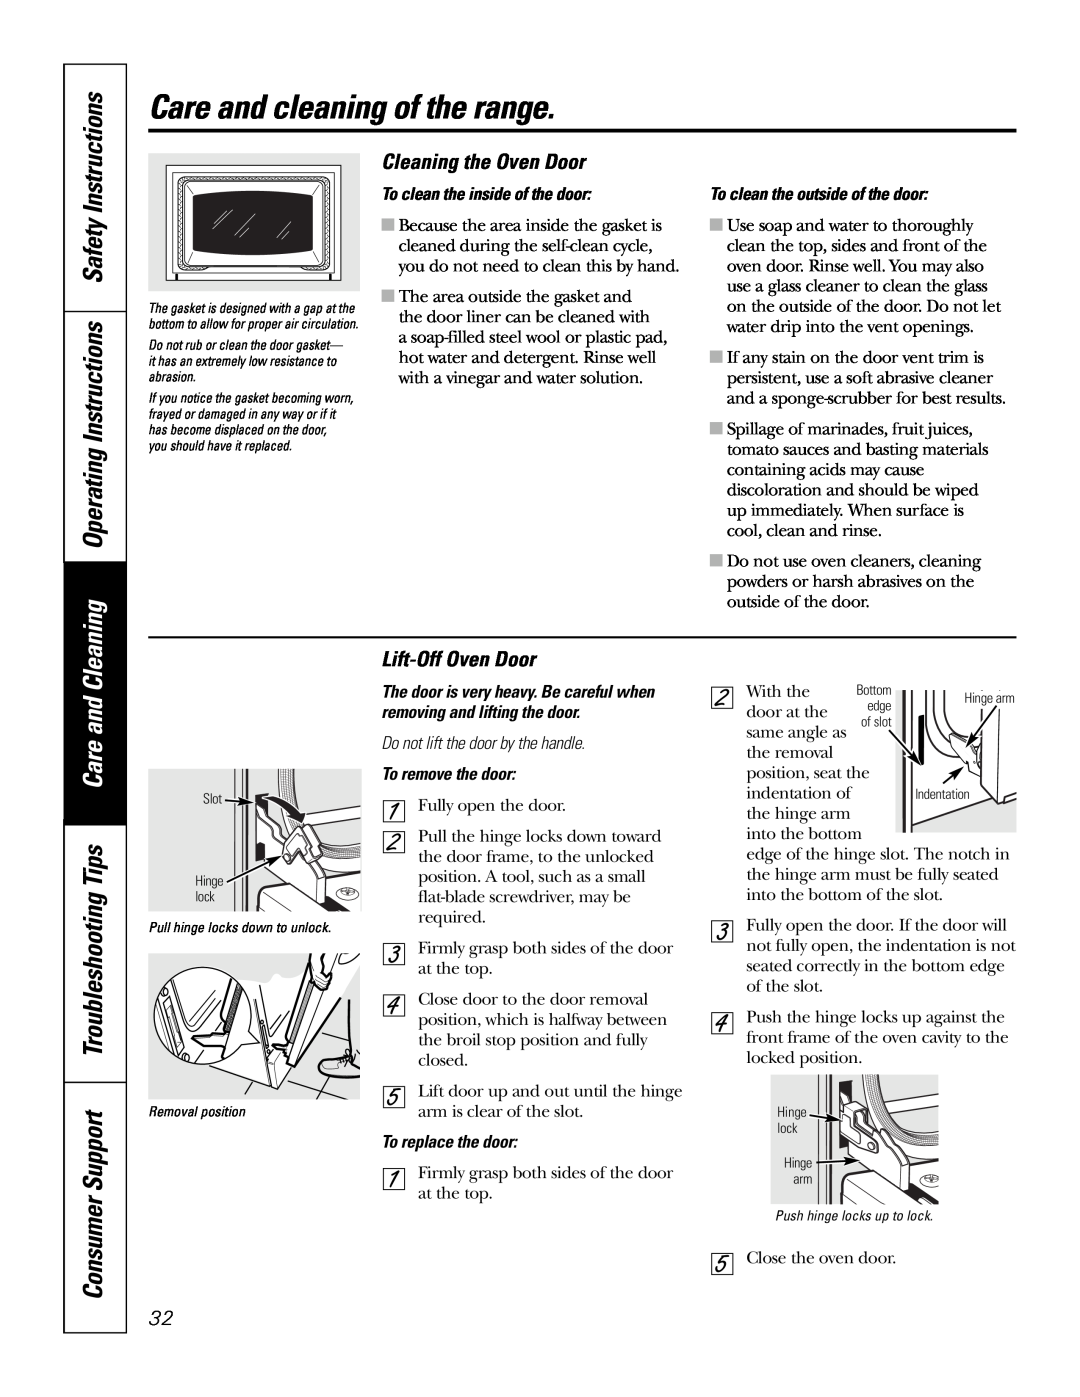 GE JB910 Cleaning Operating Instructions Safety, Cleaning the Oven Door, Lift-OffOven Door, Care and cleaning of the range 